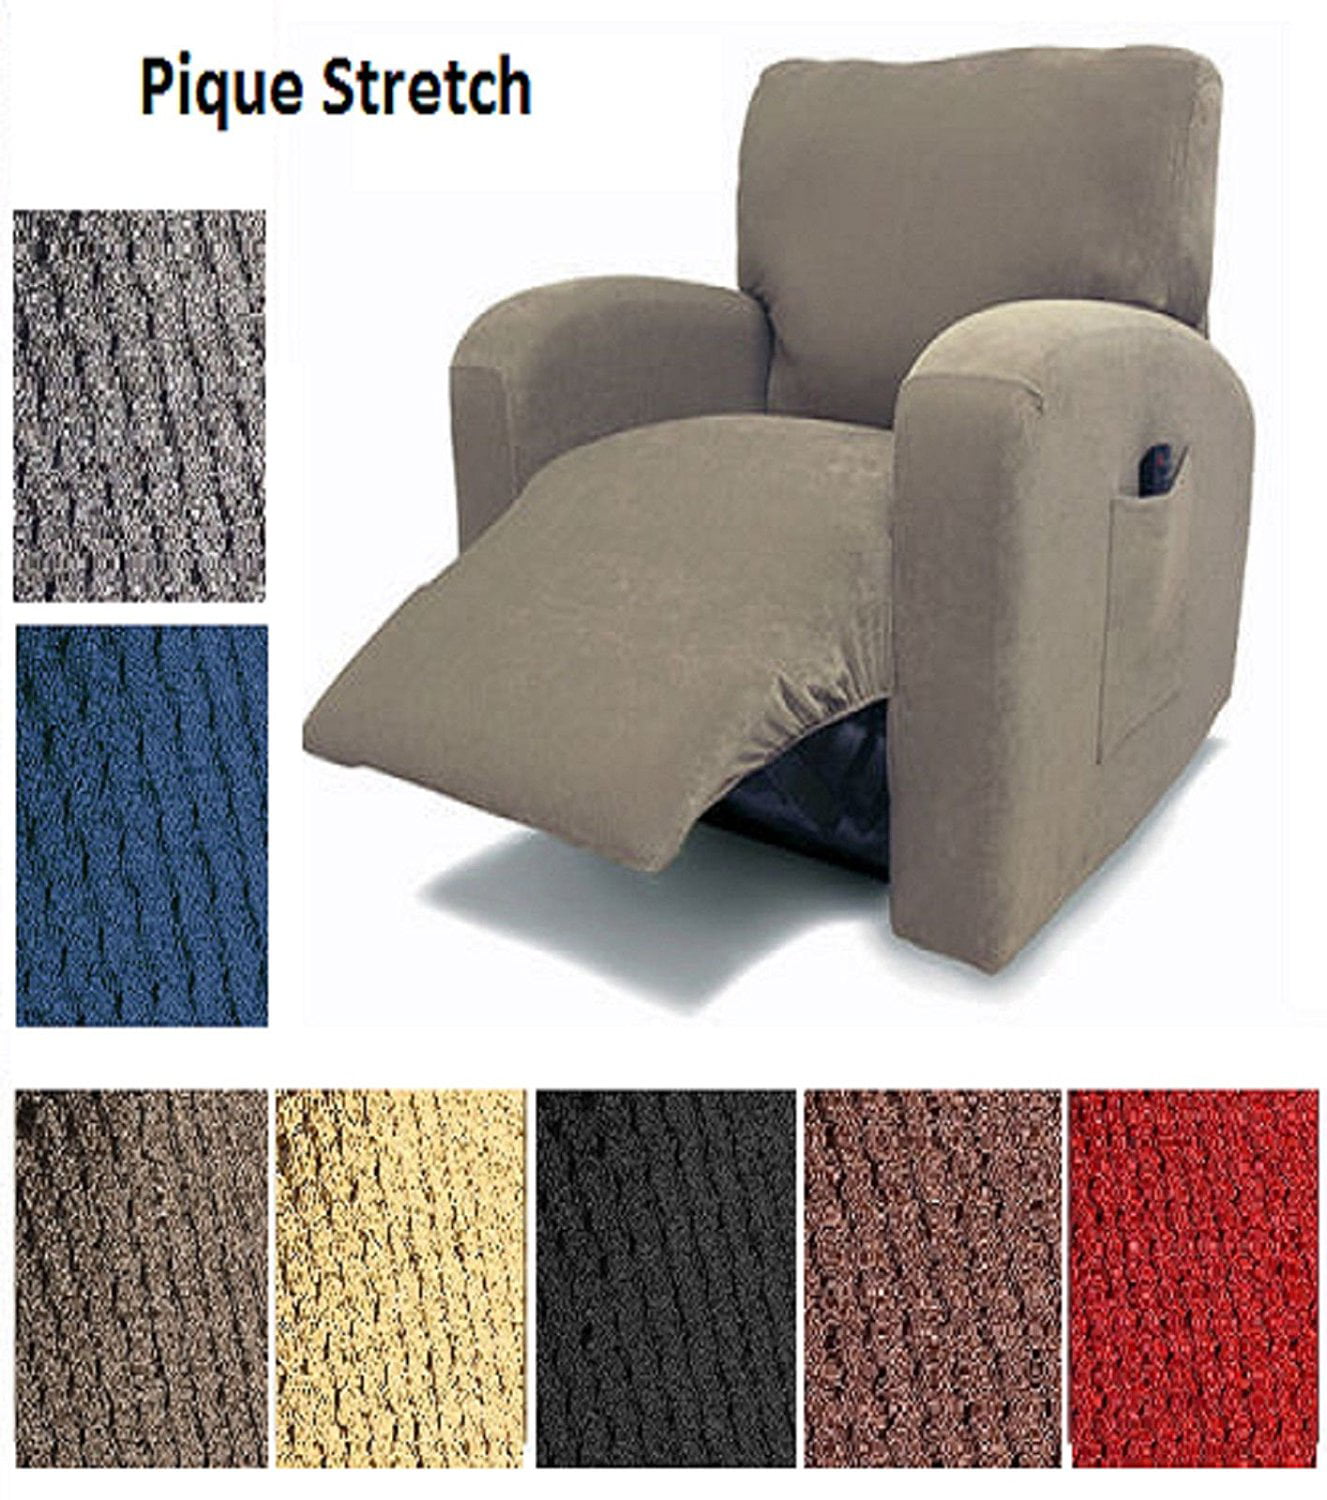 Pique Stretch Fit Furniture Chair Recliner Lazy Boy Cover Slipcover Many Colors